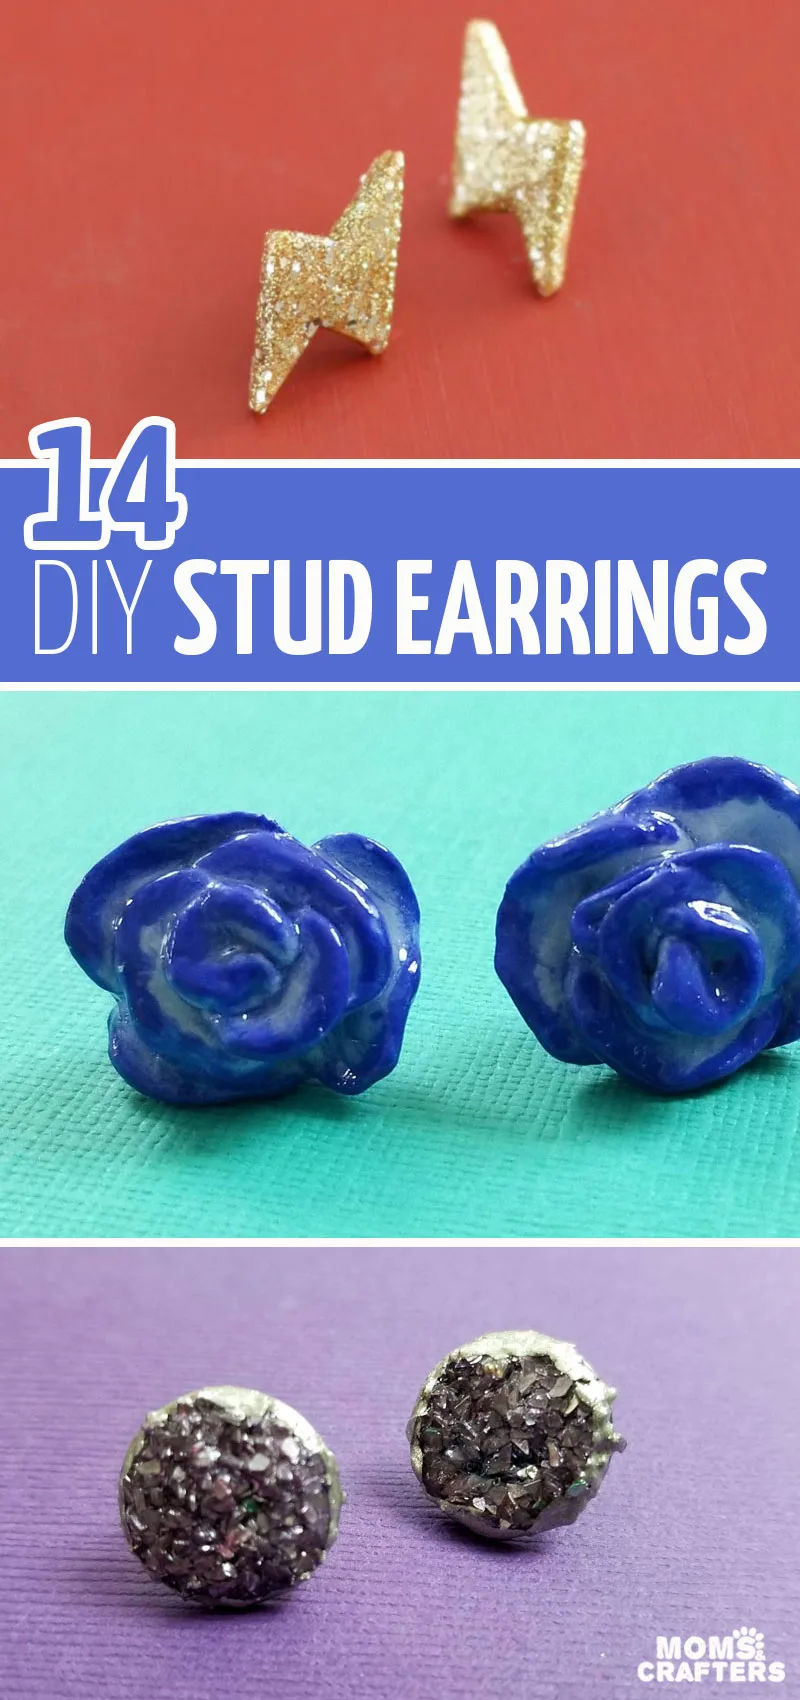 Click for 14 brilliant earring studs DIY ideas and jewelry making tutorials for beginners! These beautiful crafts for teens are simple and gorgeous - and totally unique statement earrings.